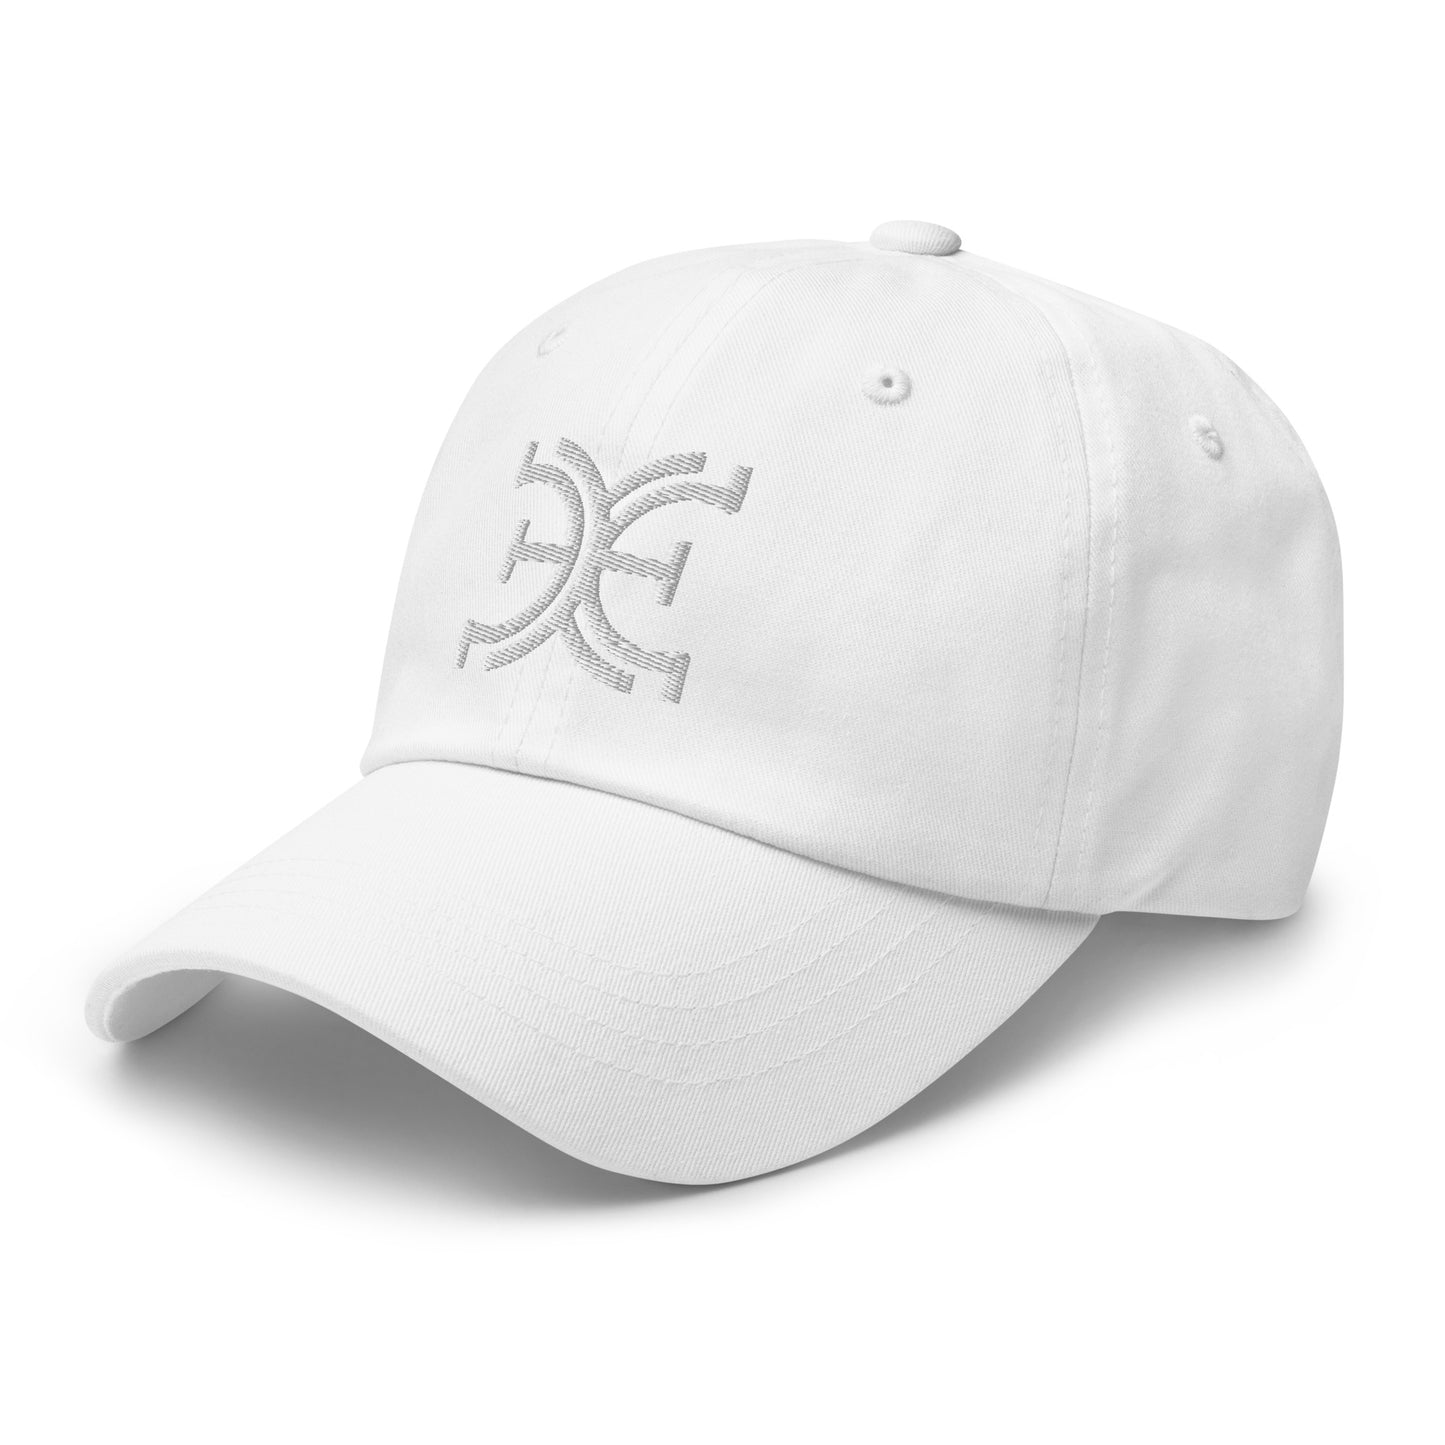 Elevated Equestrian Logo White on White Dad hat